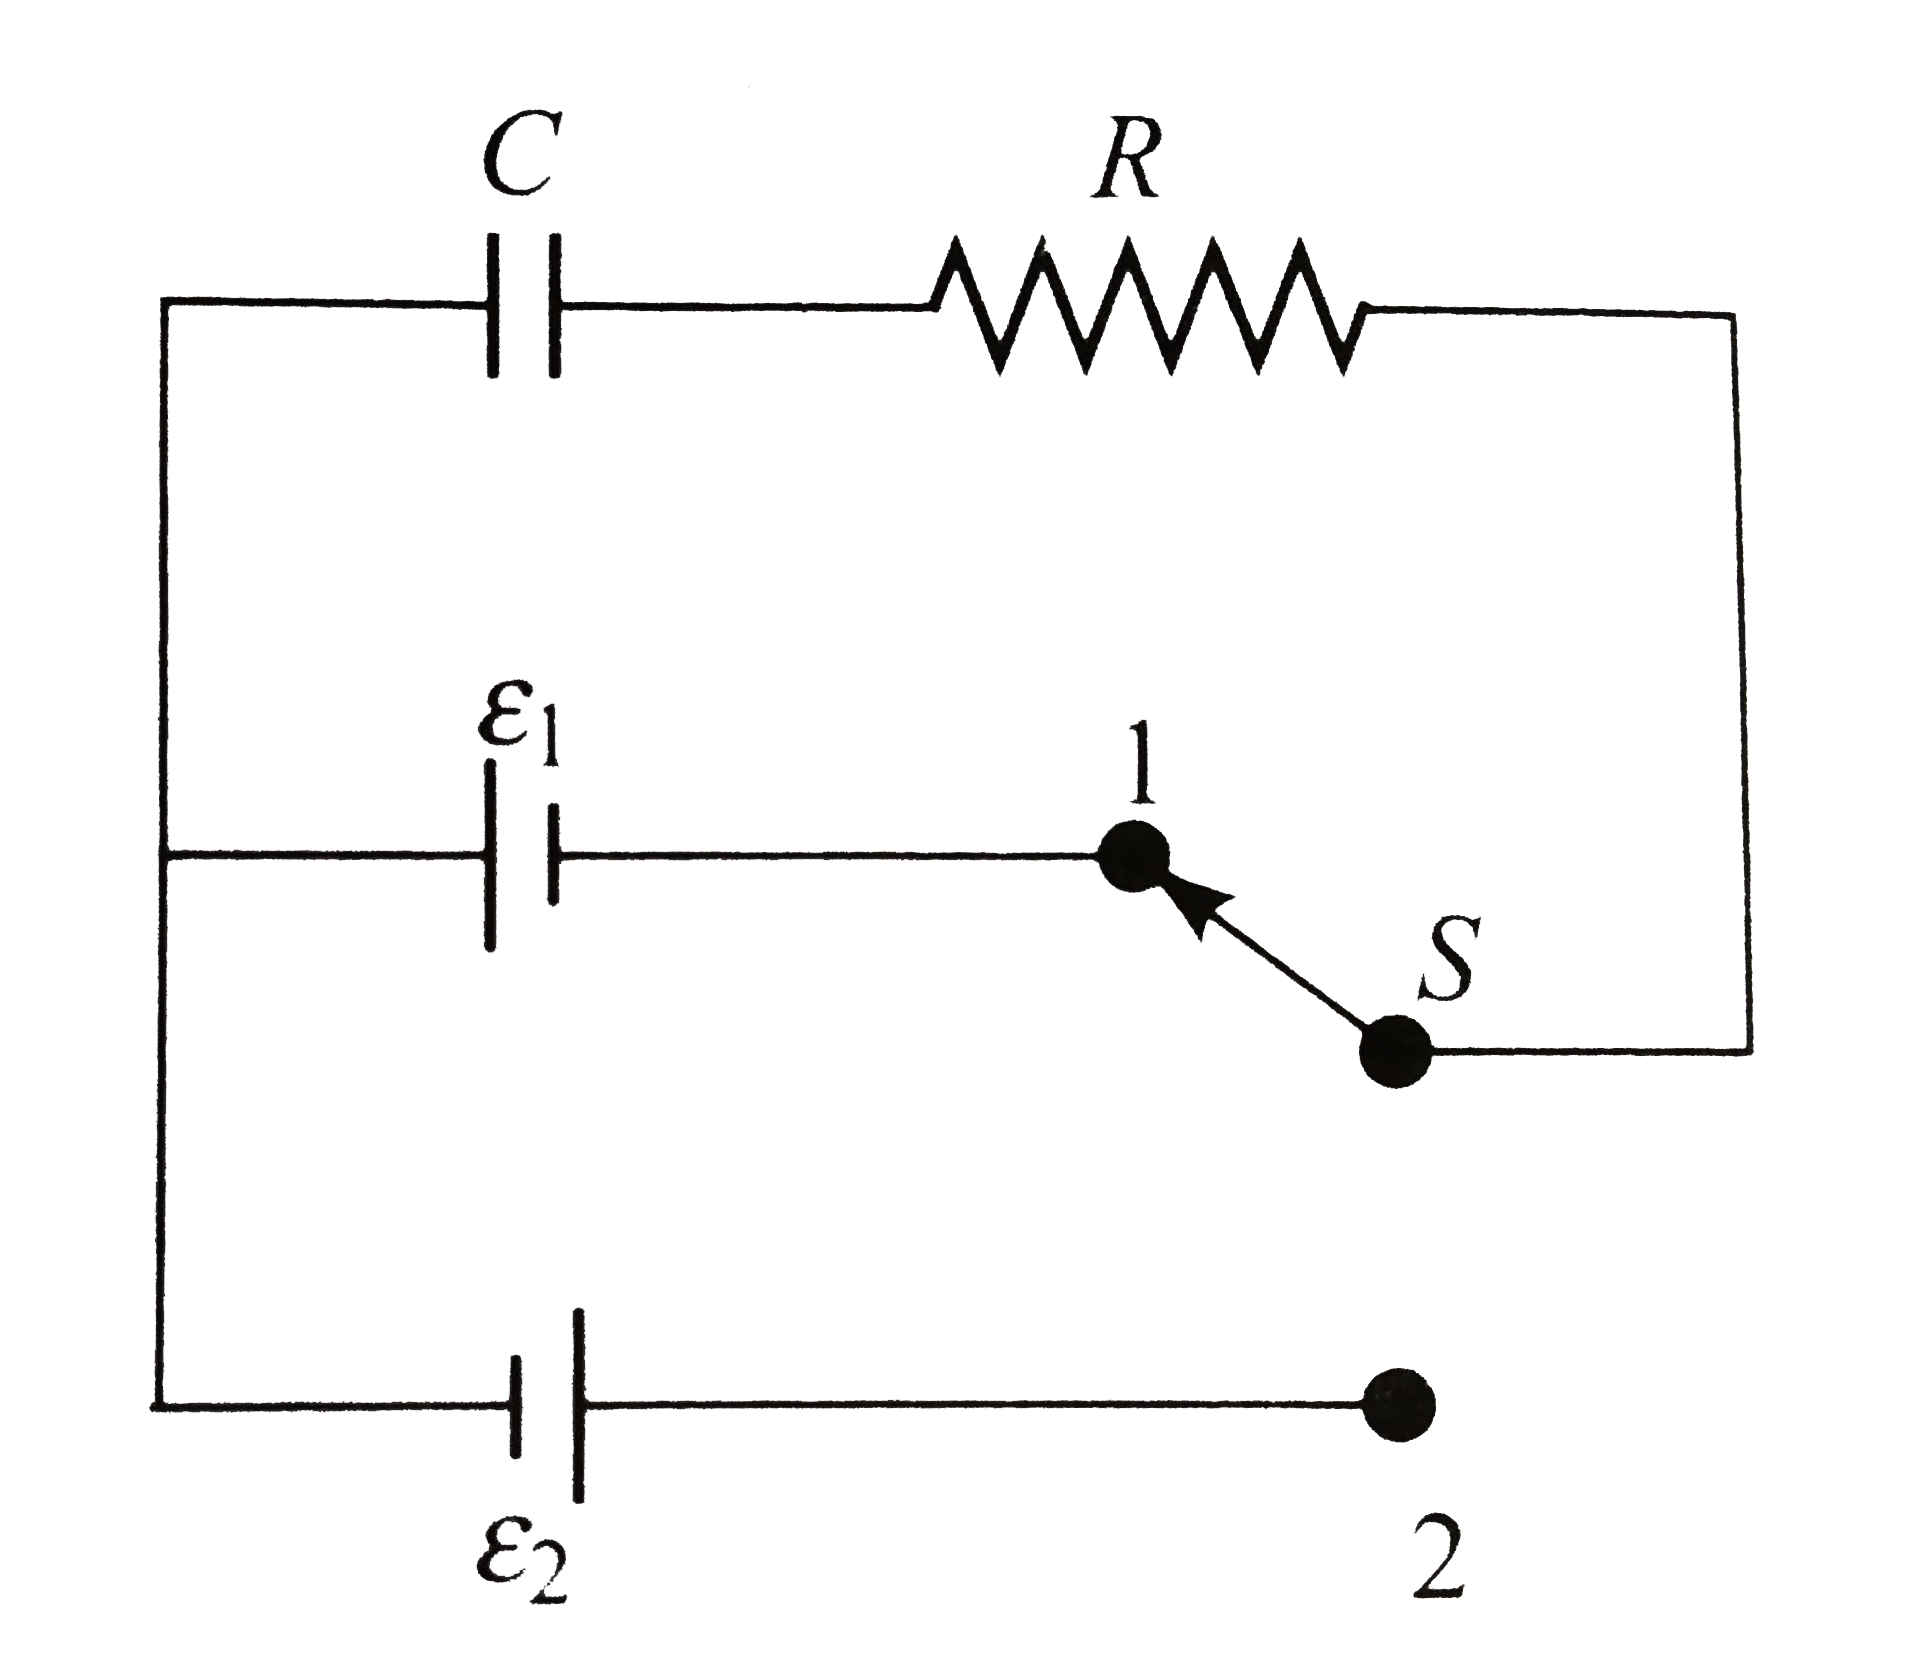 Initially, switch S is connected to position 1 for a long time . The net amount of heat generated in the circuit after it is shifted to position 2 is  .